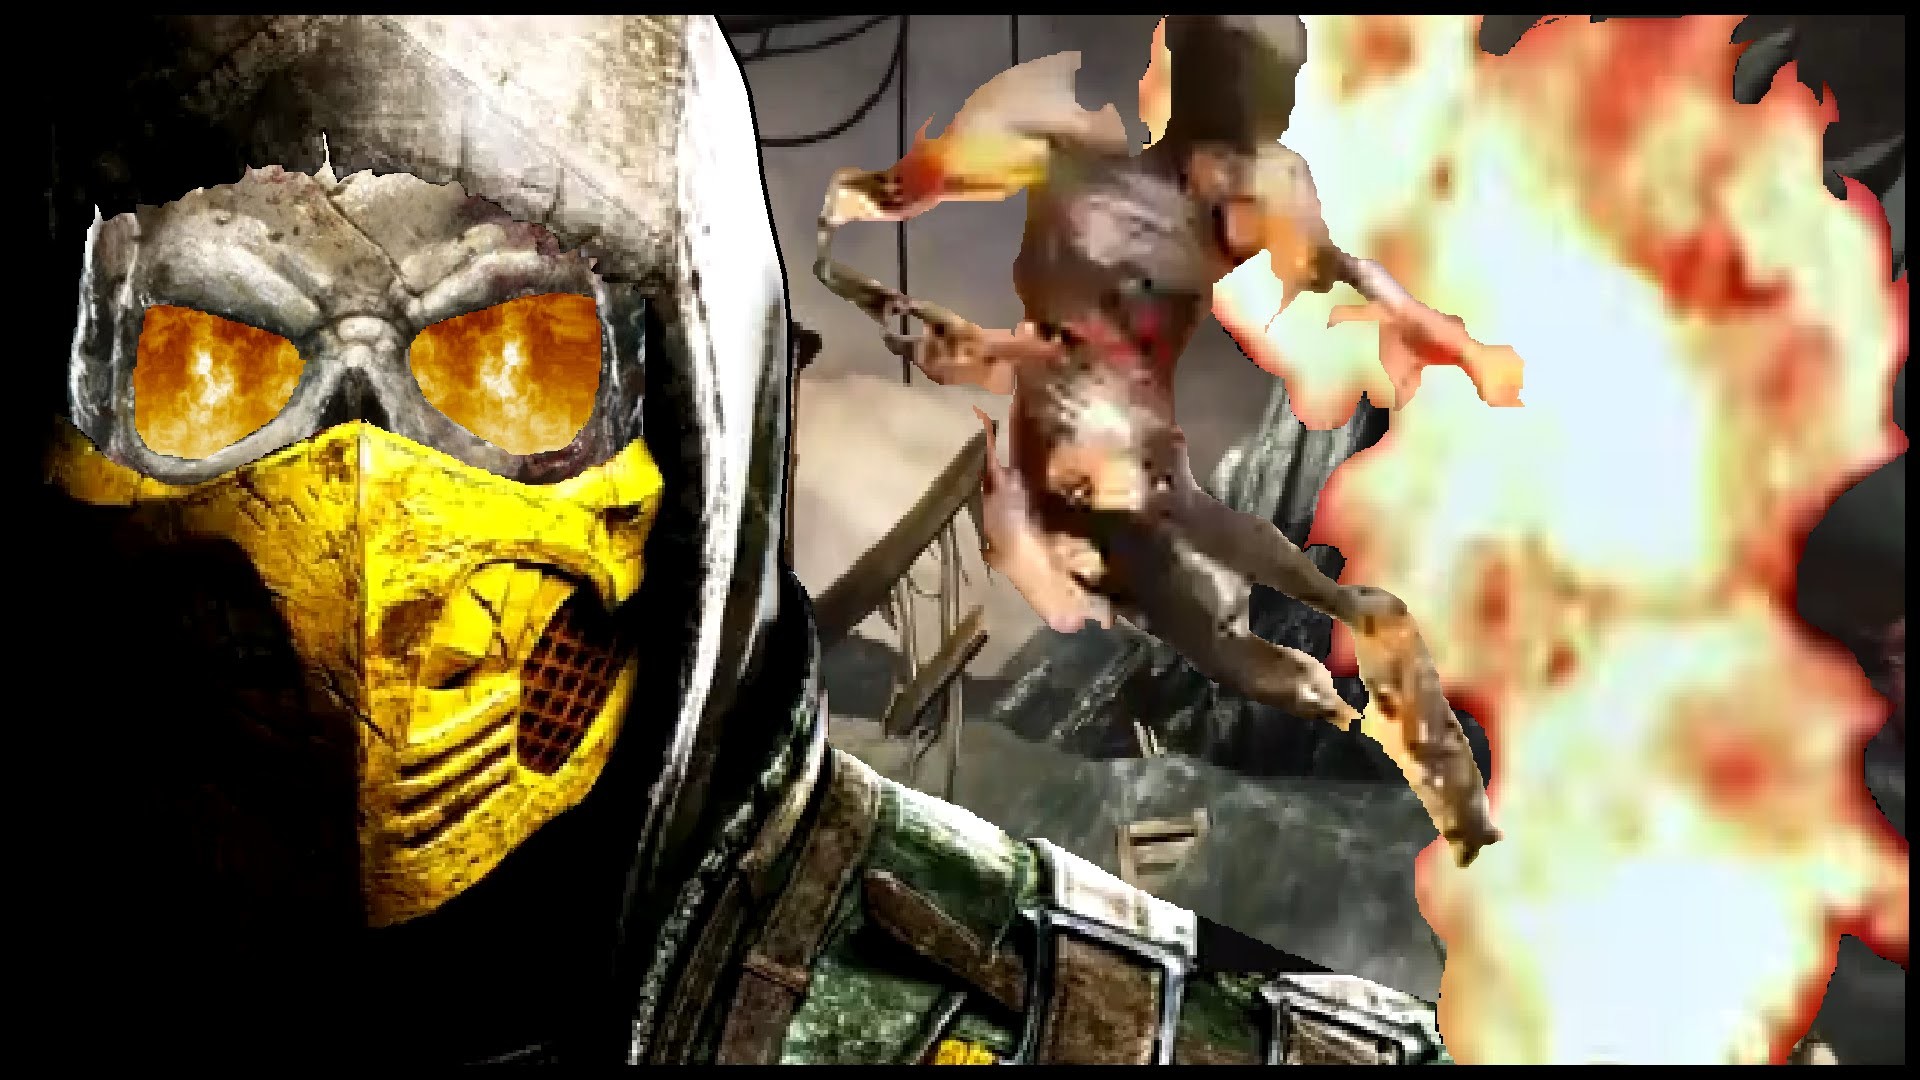 1920x1080 Mortal Kombat X: Scorpion Uncut Fatality, X-Ray, and Variations  (Commentary) (PS4) - YouTube